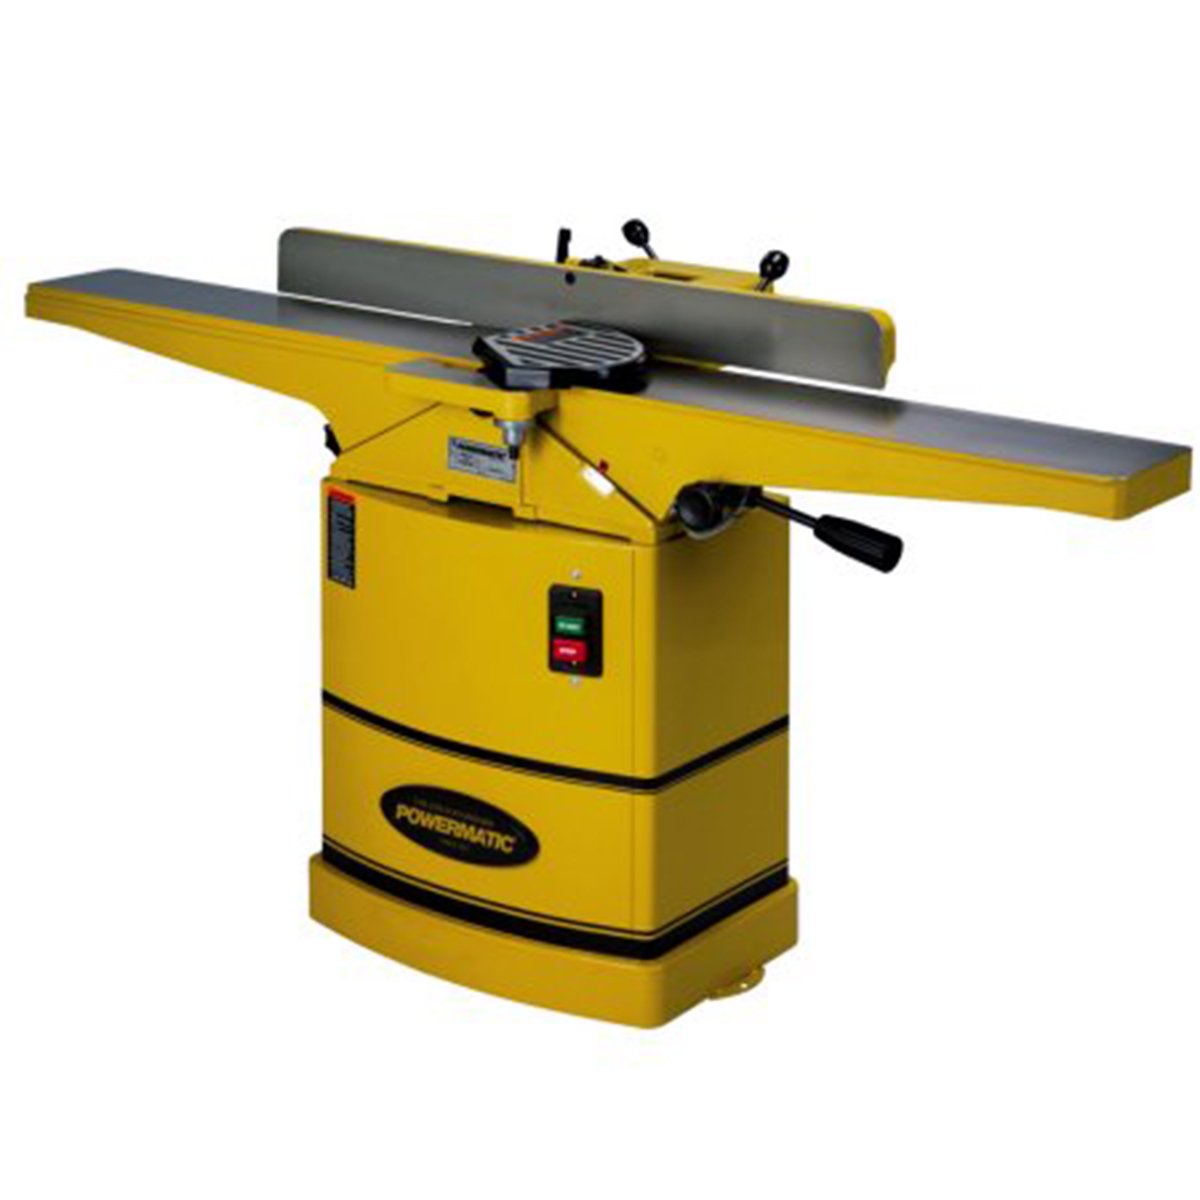 Powermatic 54 6" Jointer, 1HP 1PH 115/230V - 2 options to choose from - Ultimate Tools